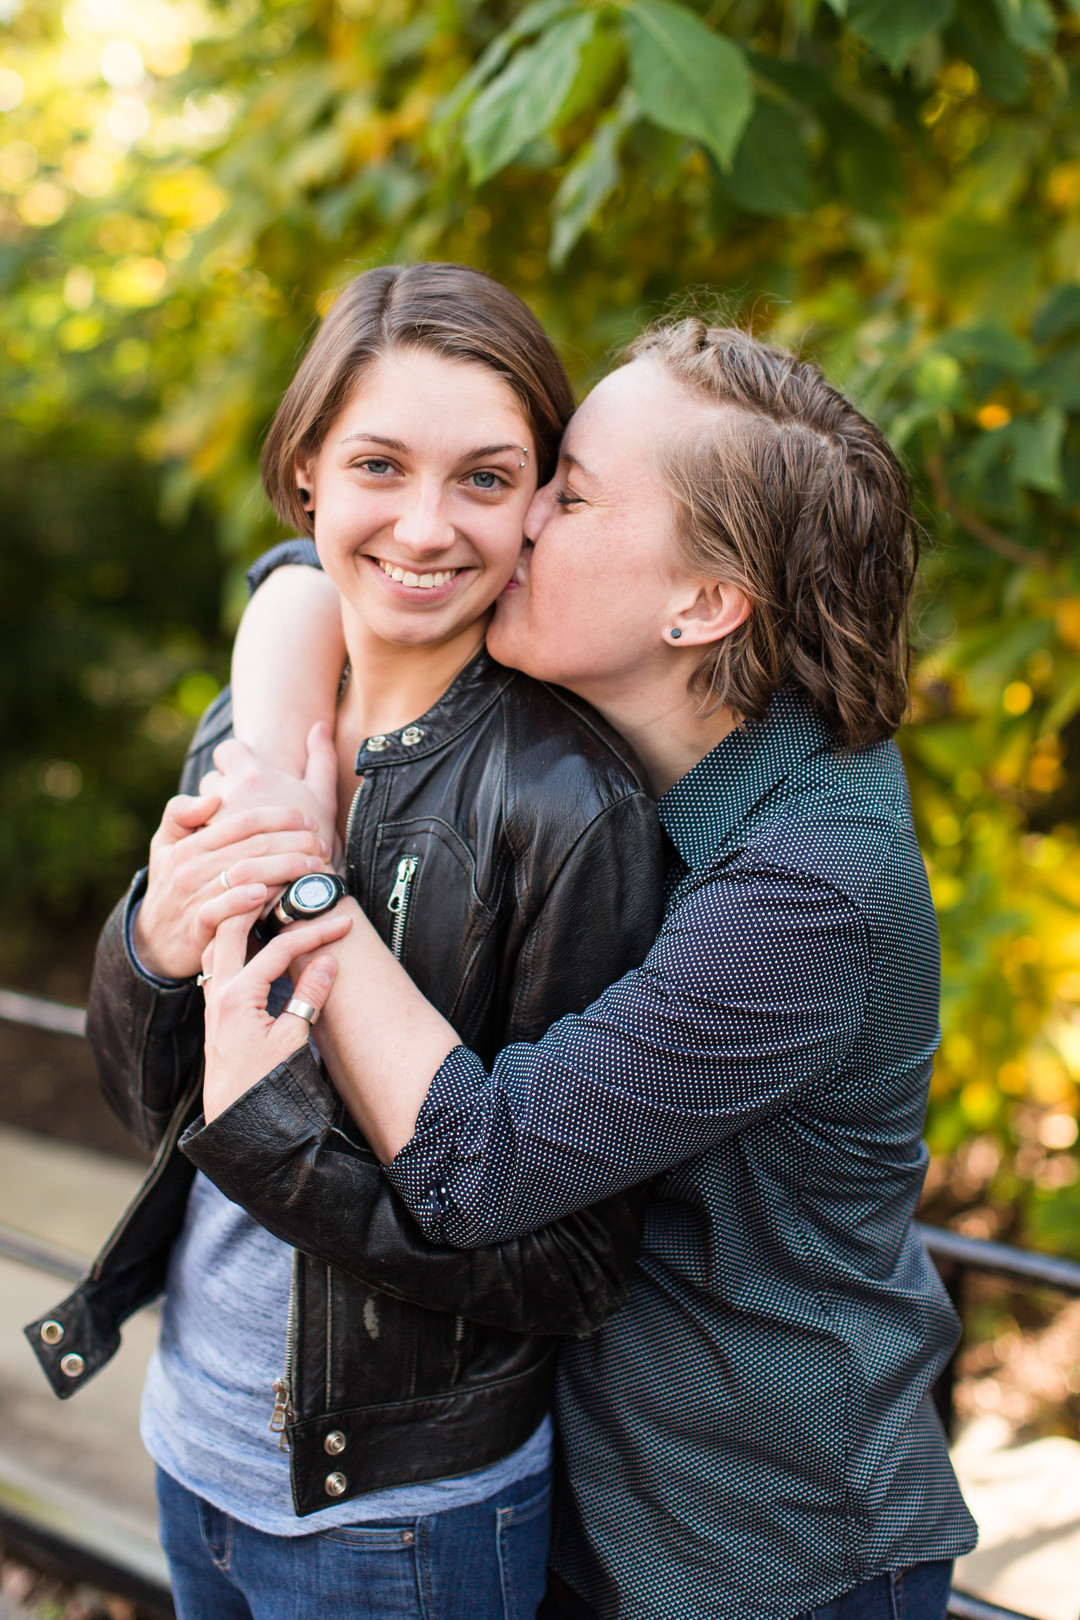 Fun wildlife engagement photos at the National Zoo two brides lesbian engagement leather jacket casual button down kiss